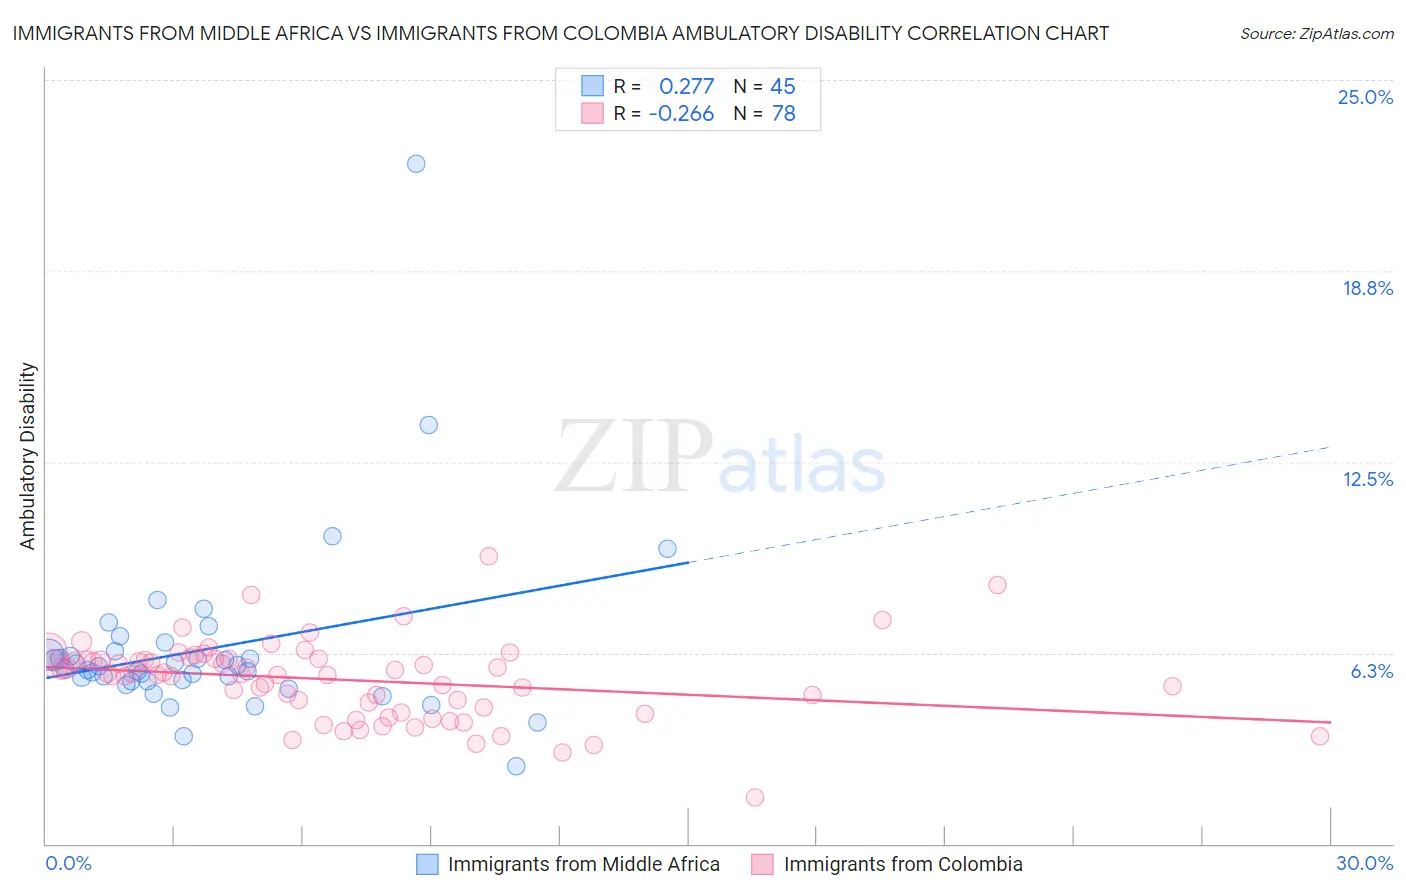 Immigrants from Middle Africa vs Immigrants from Colombia Ambulatory Disability